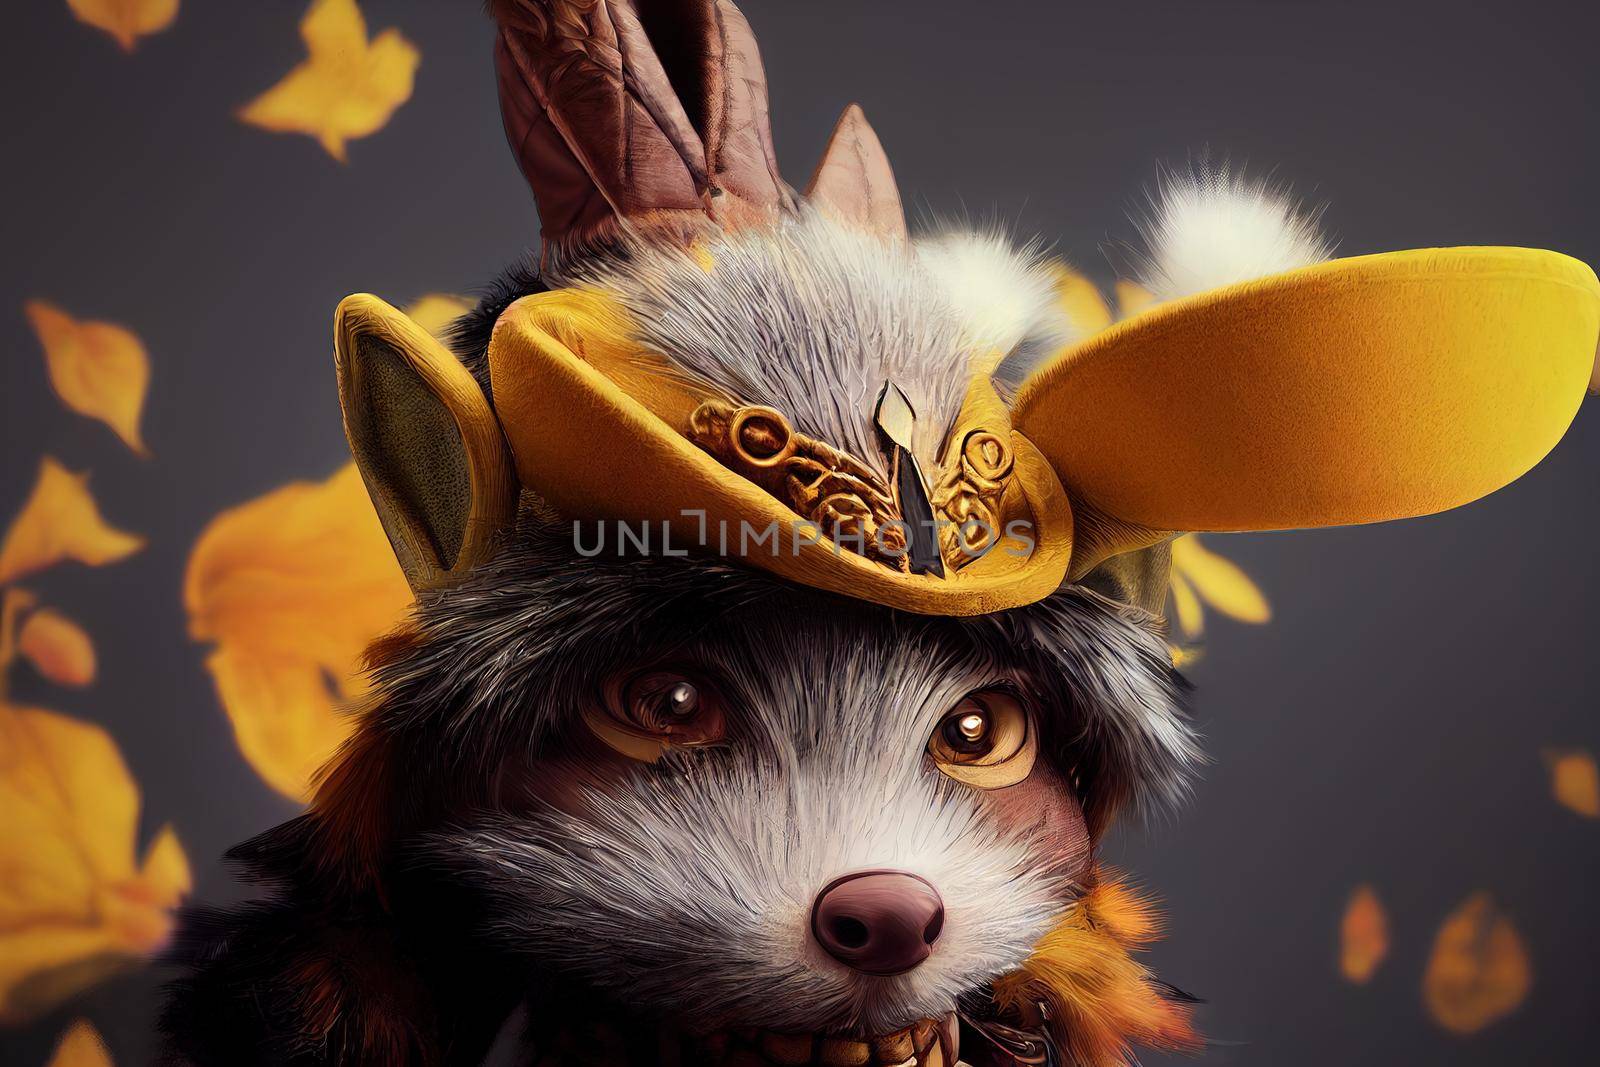 frame realistic animal with costume yordle character. High quality 3d illustration